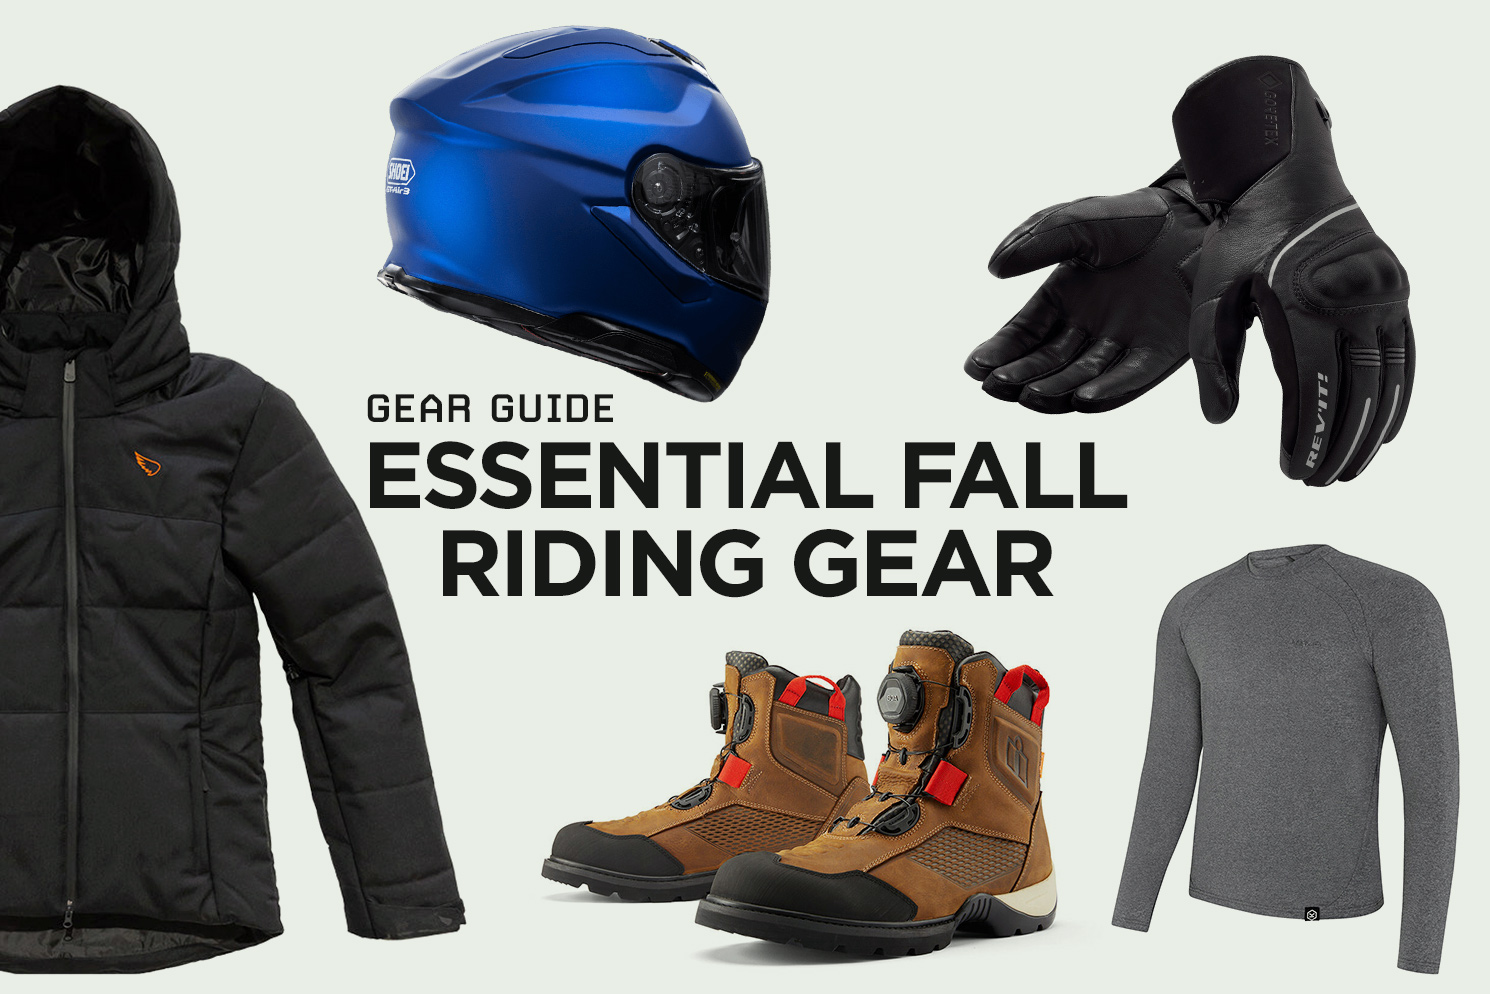 Gear guide: 5 essential pieces of motorcycle gear for the fall